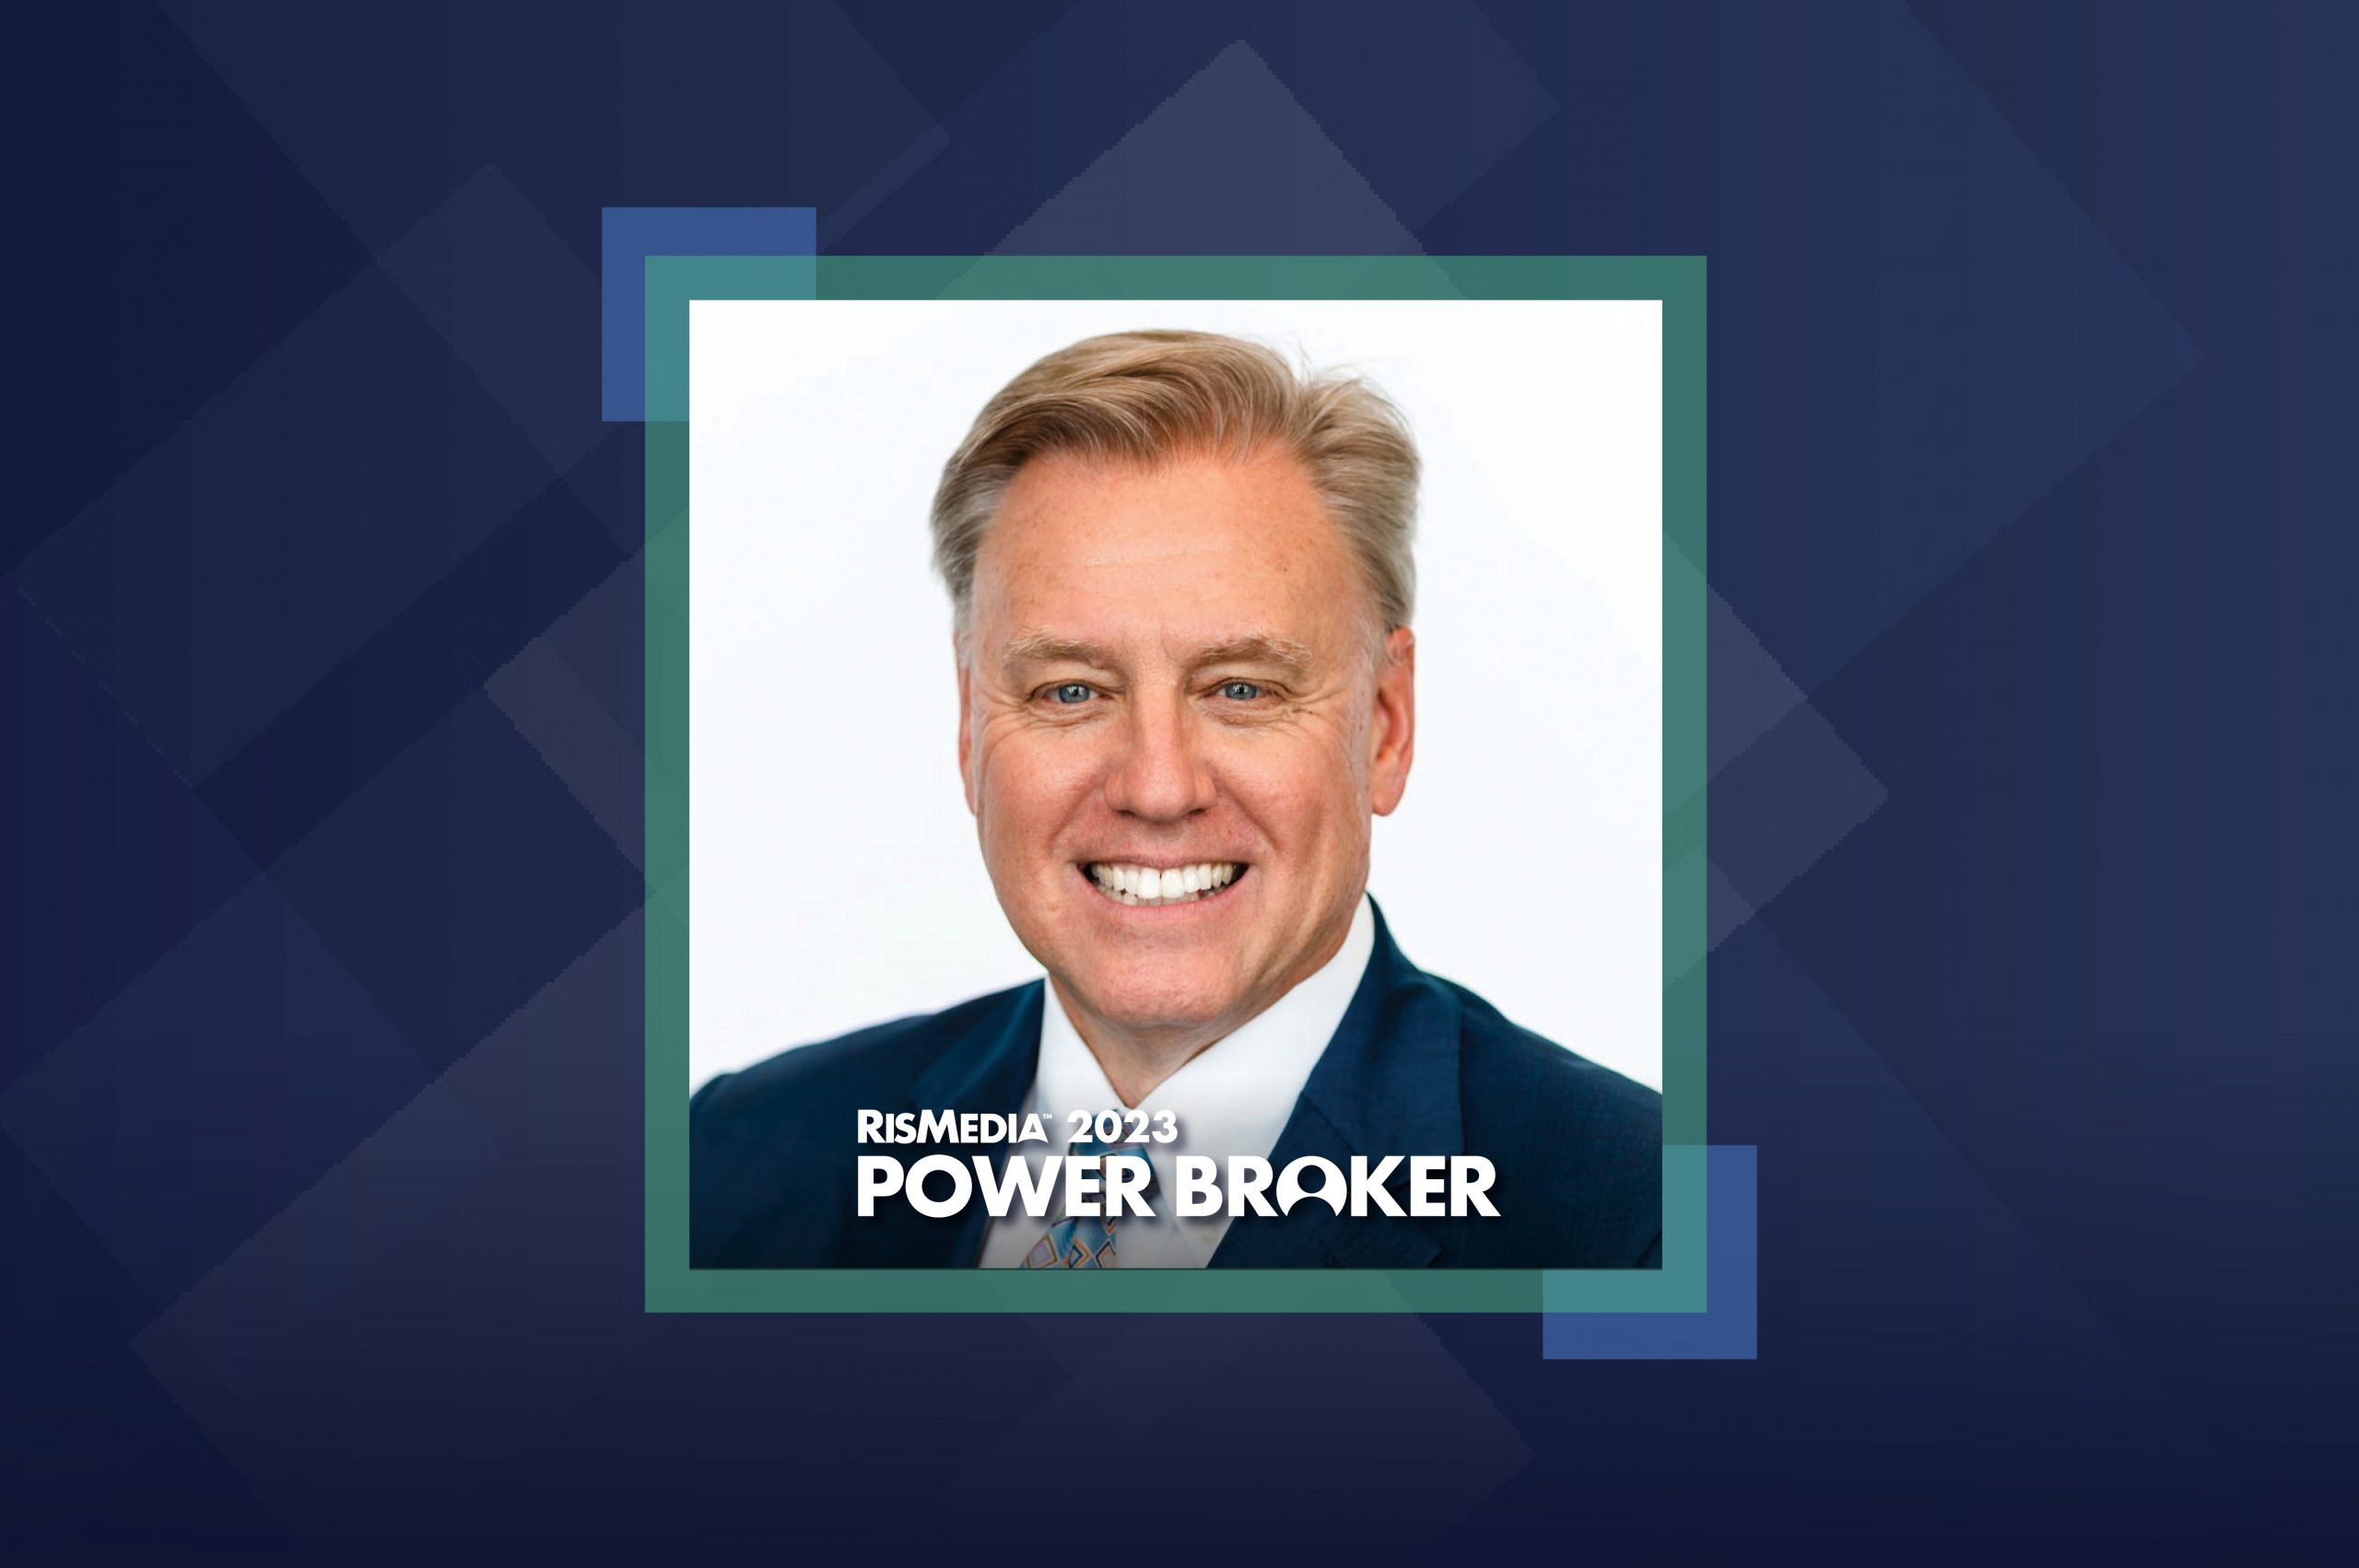 The Power Broker Interview: Why Rick Haase Says His Team’s Commitment ...